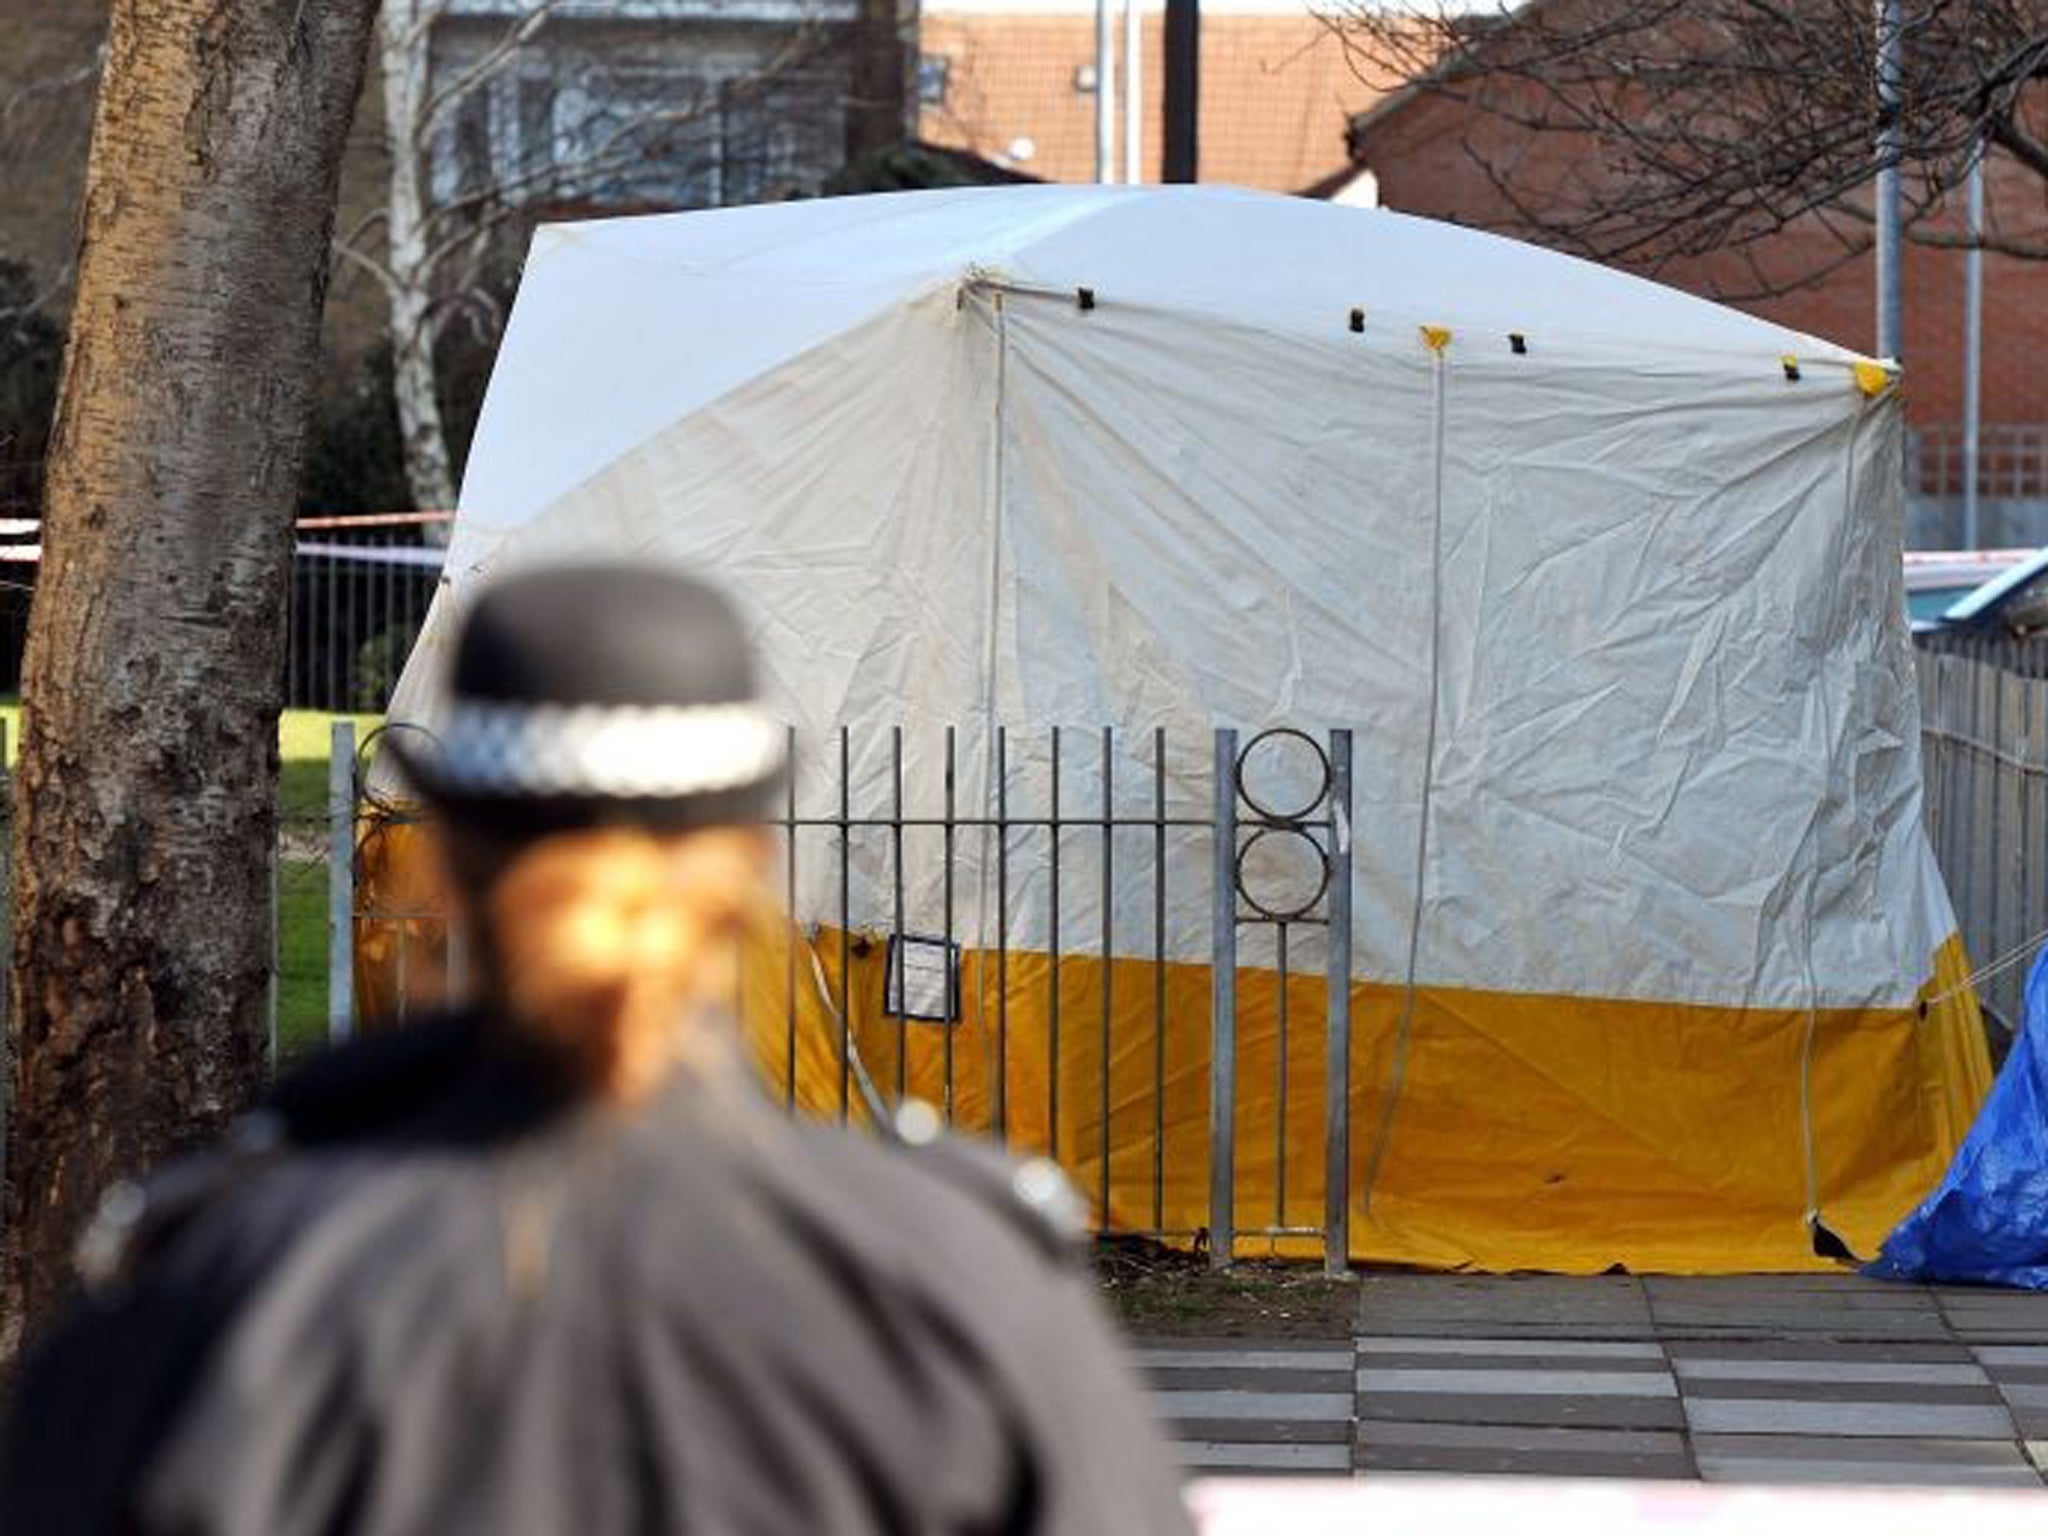 A police officer stands near a scene-of-crime tent after a 19-year-old man died after he was found injured in Bounces Road, Edmonton, following reports of shots being fired, Scotland Yard said